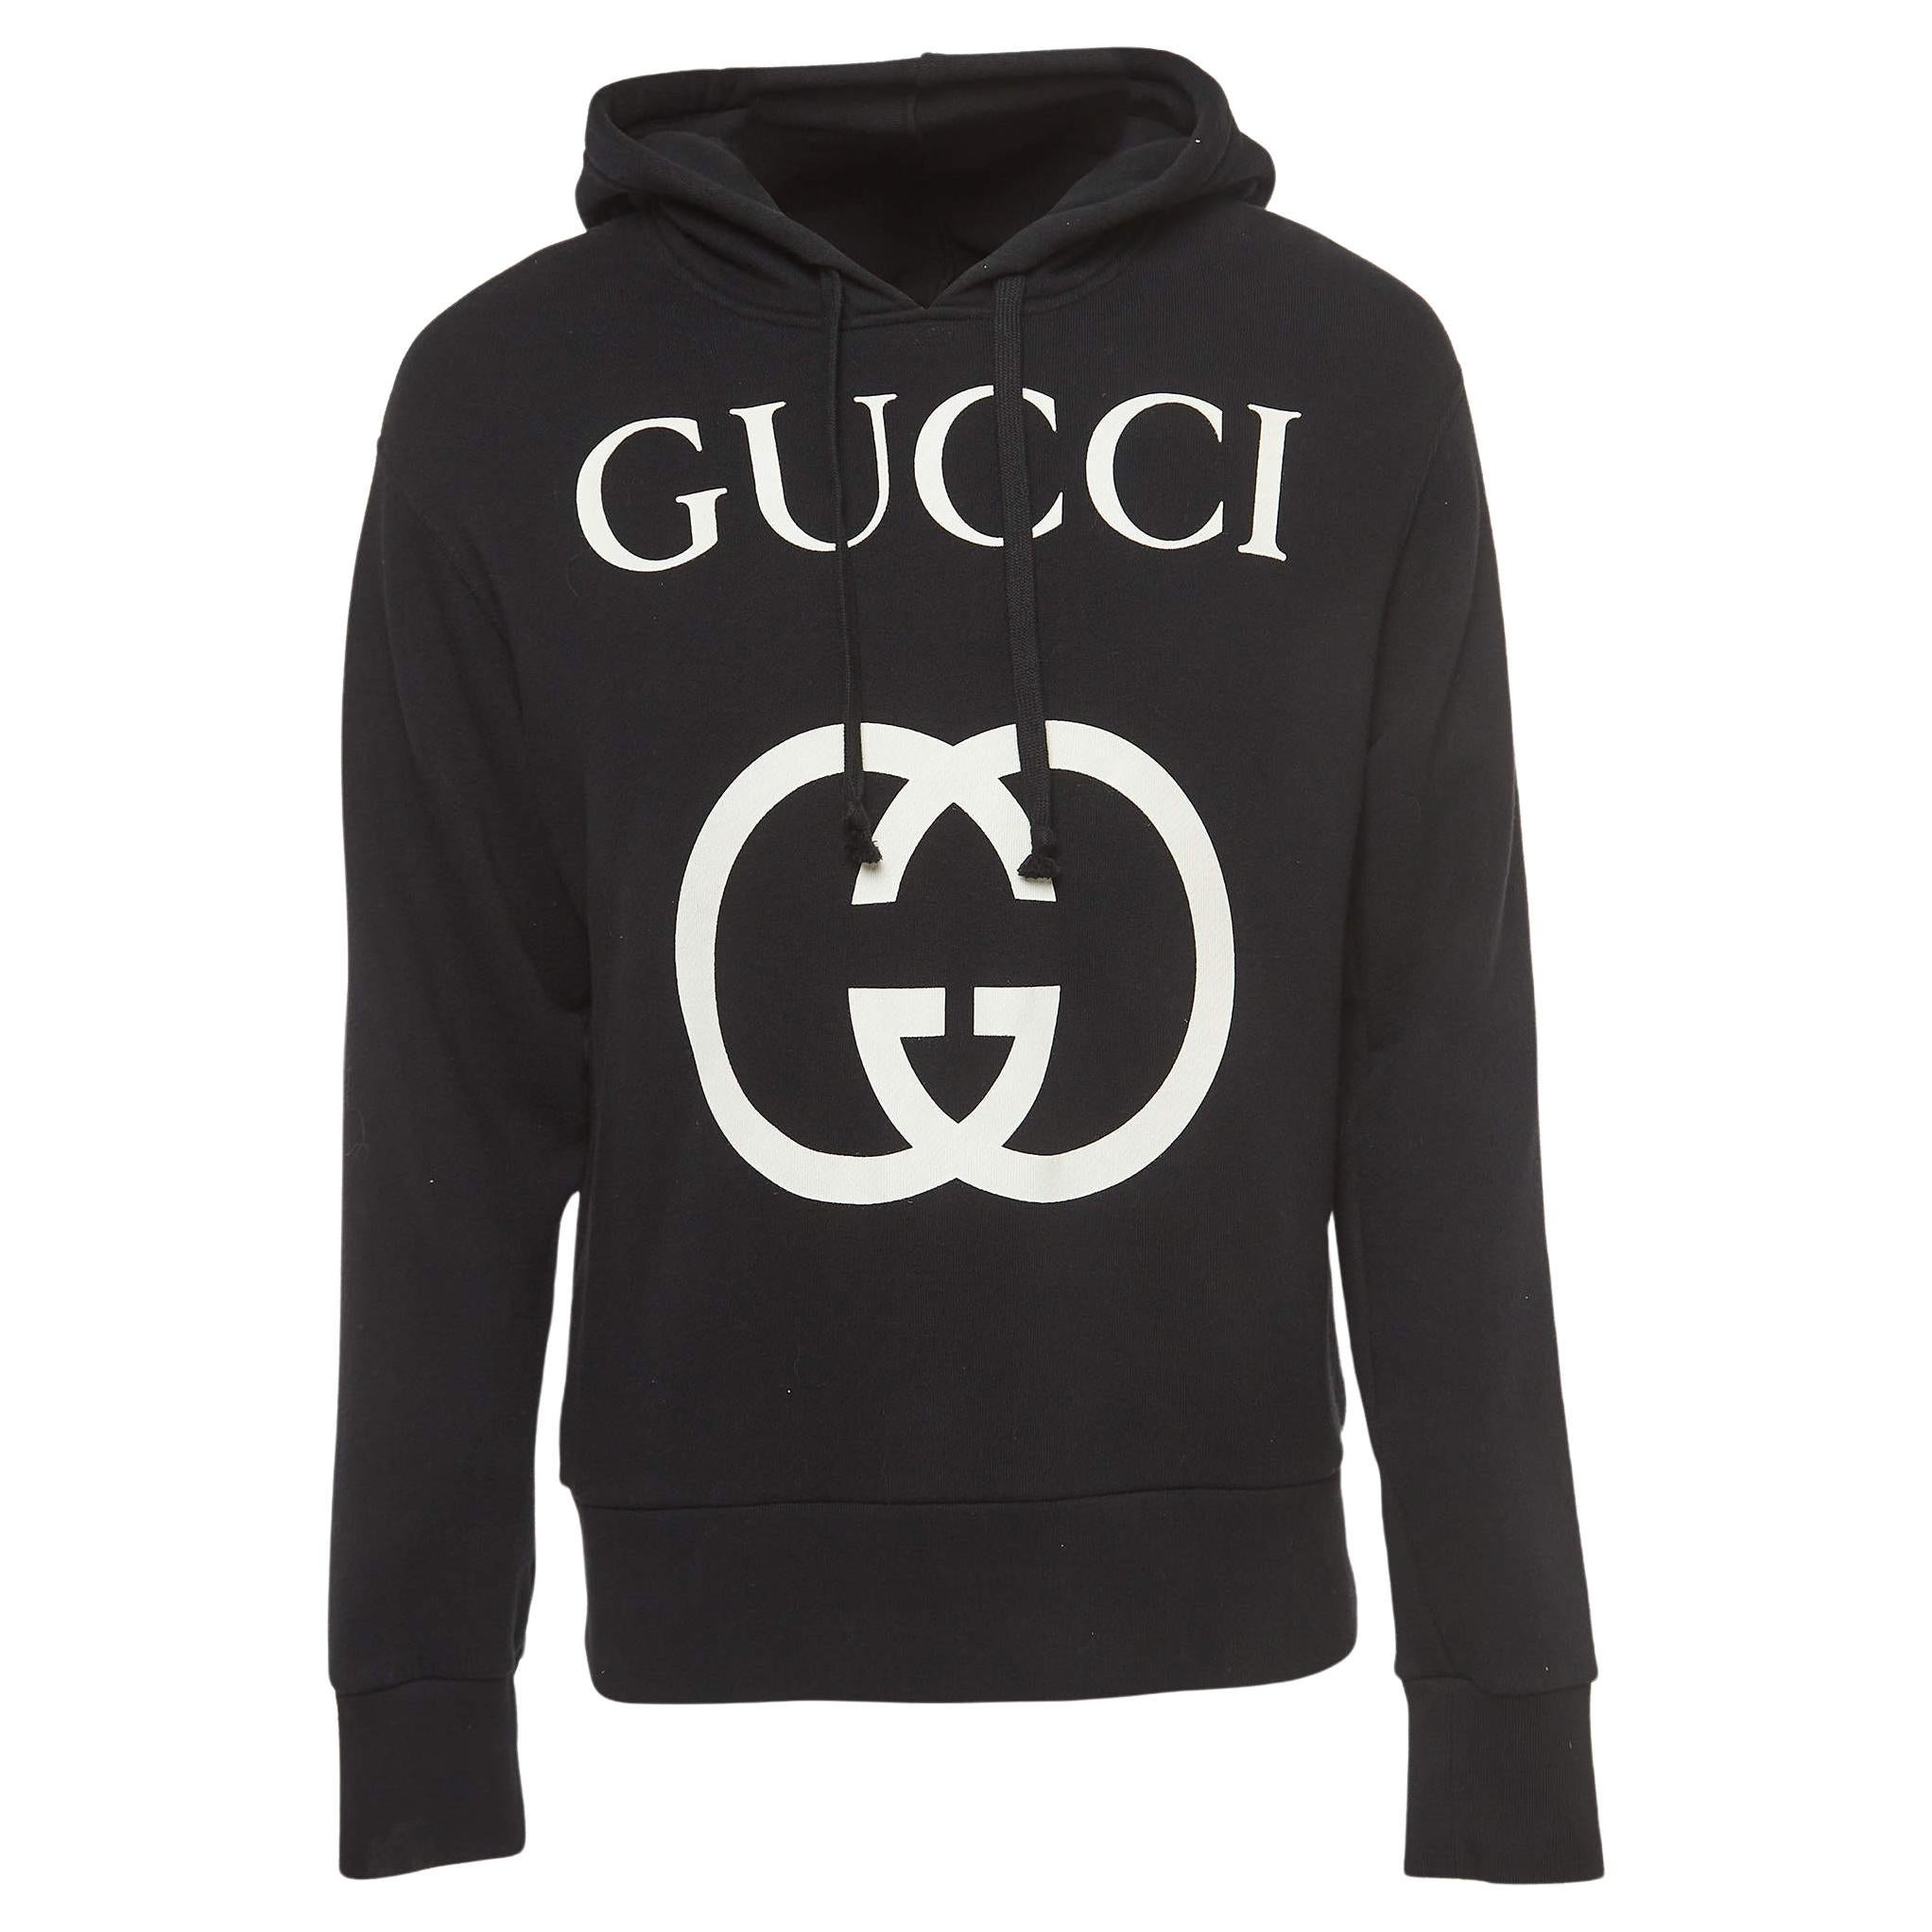 Gucci Black Logo Printed Cotton Knit Hooded Sweatshirt XS For Sale